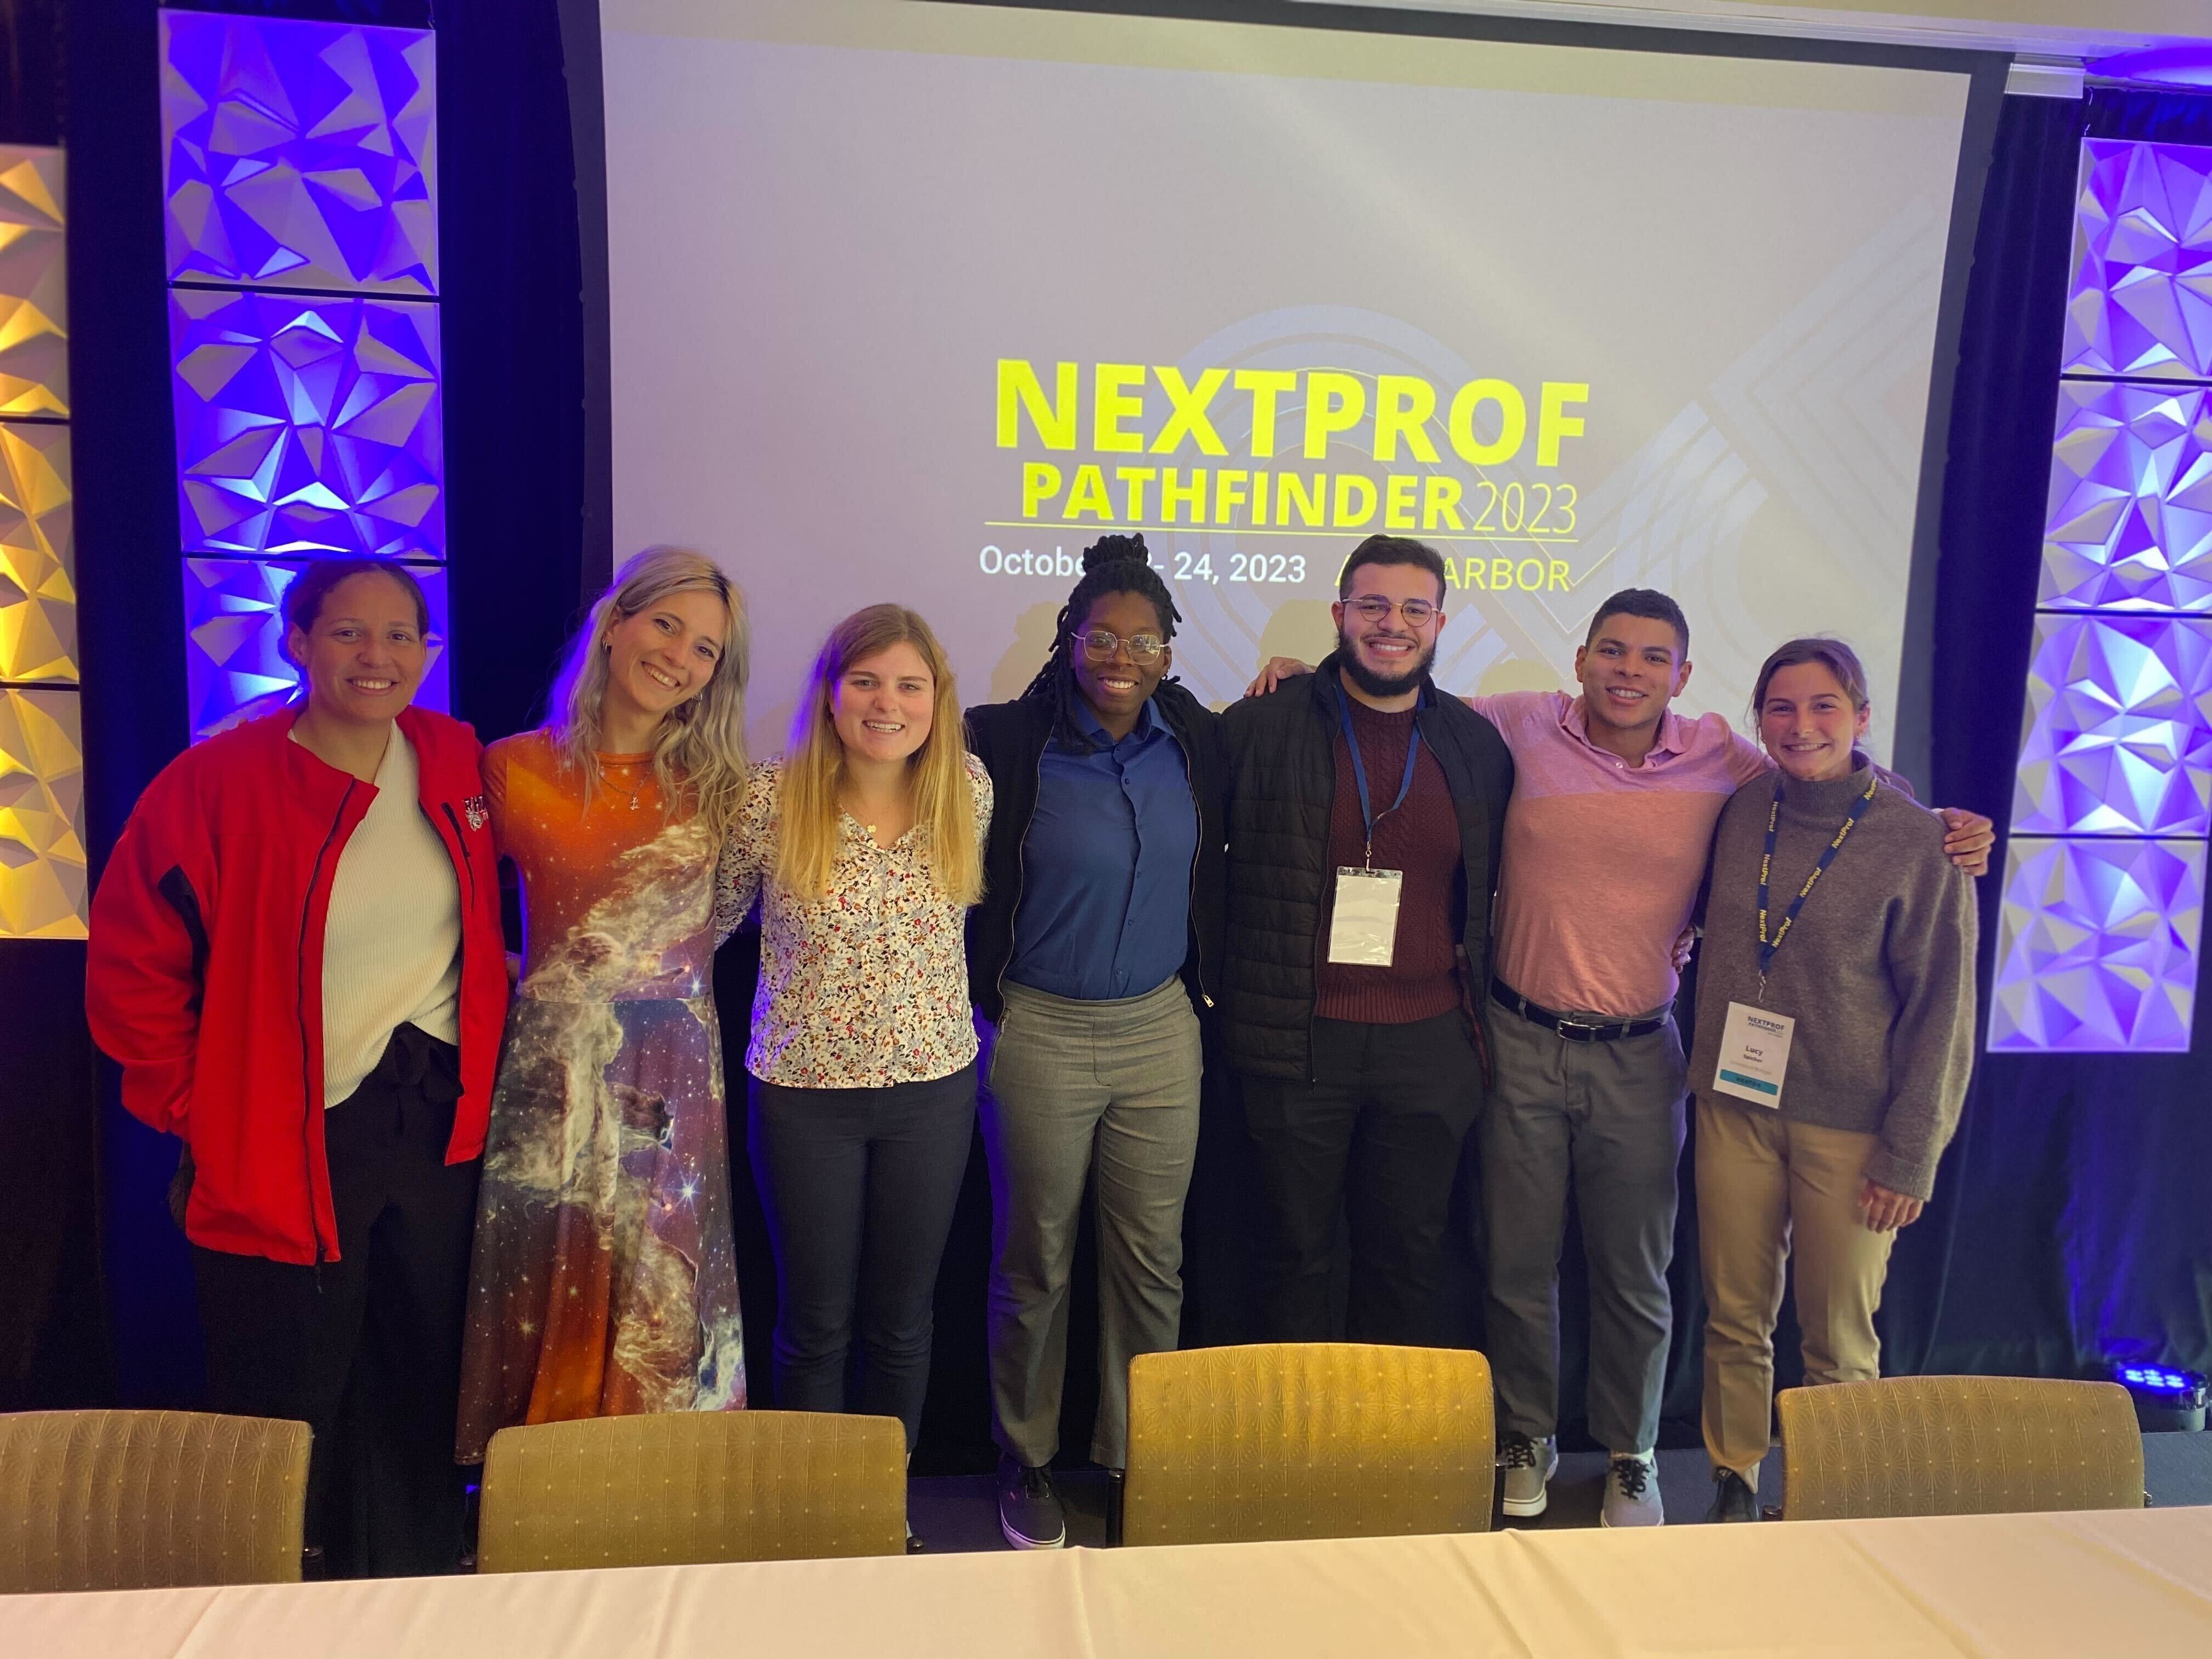 Mia standing with five other PhD students in front a presenting screen that says NextProf Pathfinder.